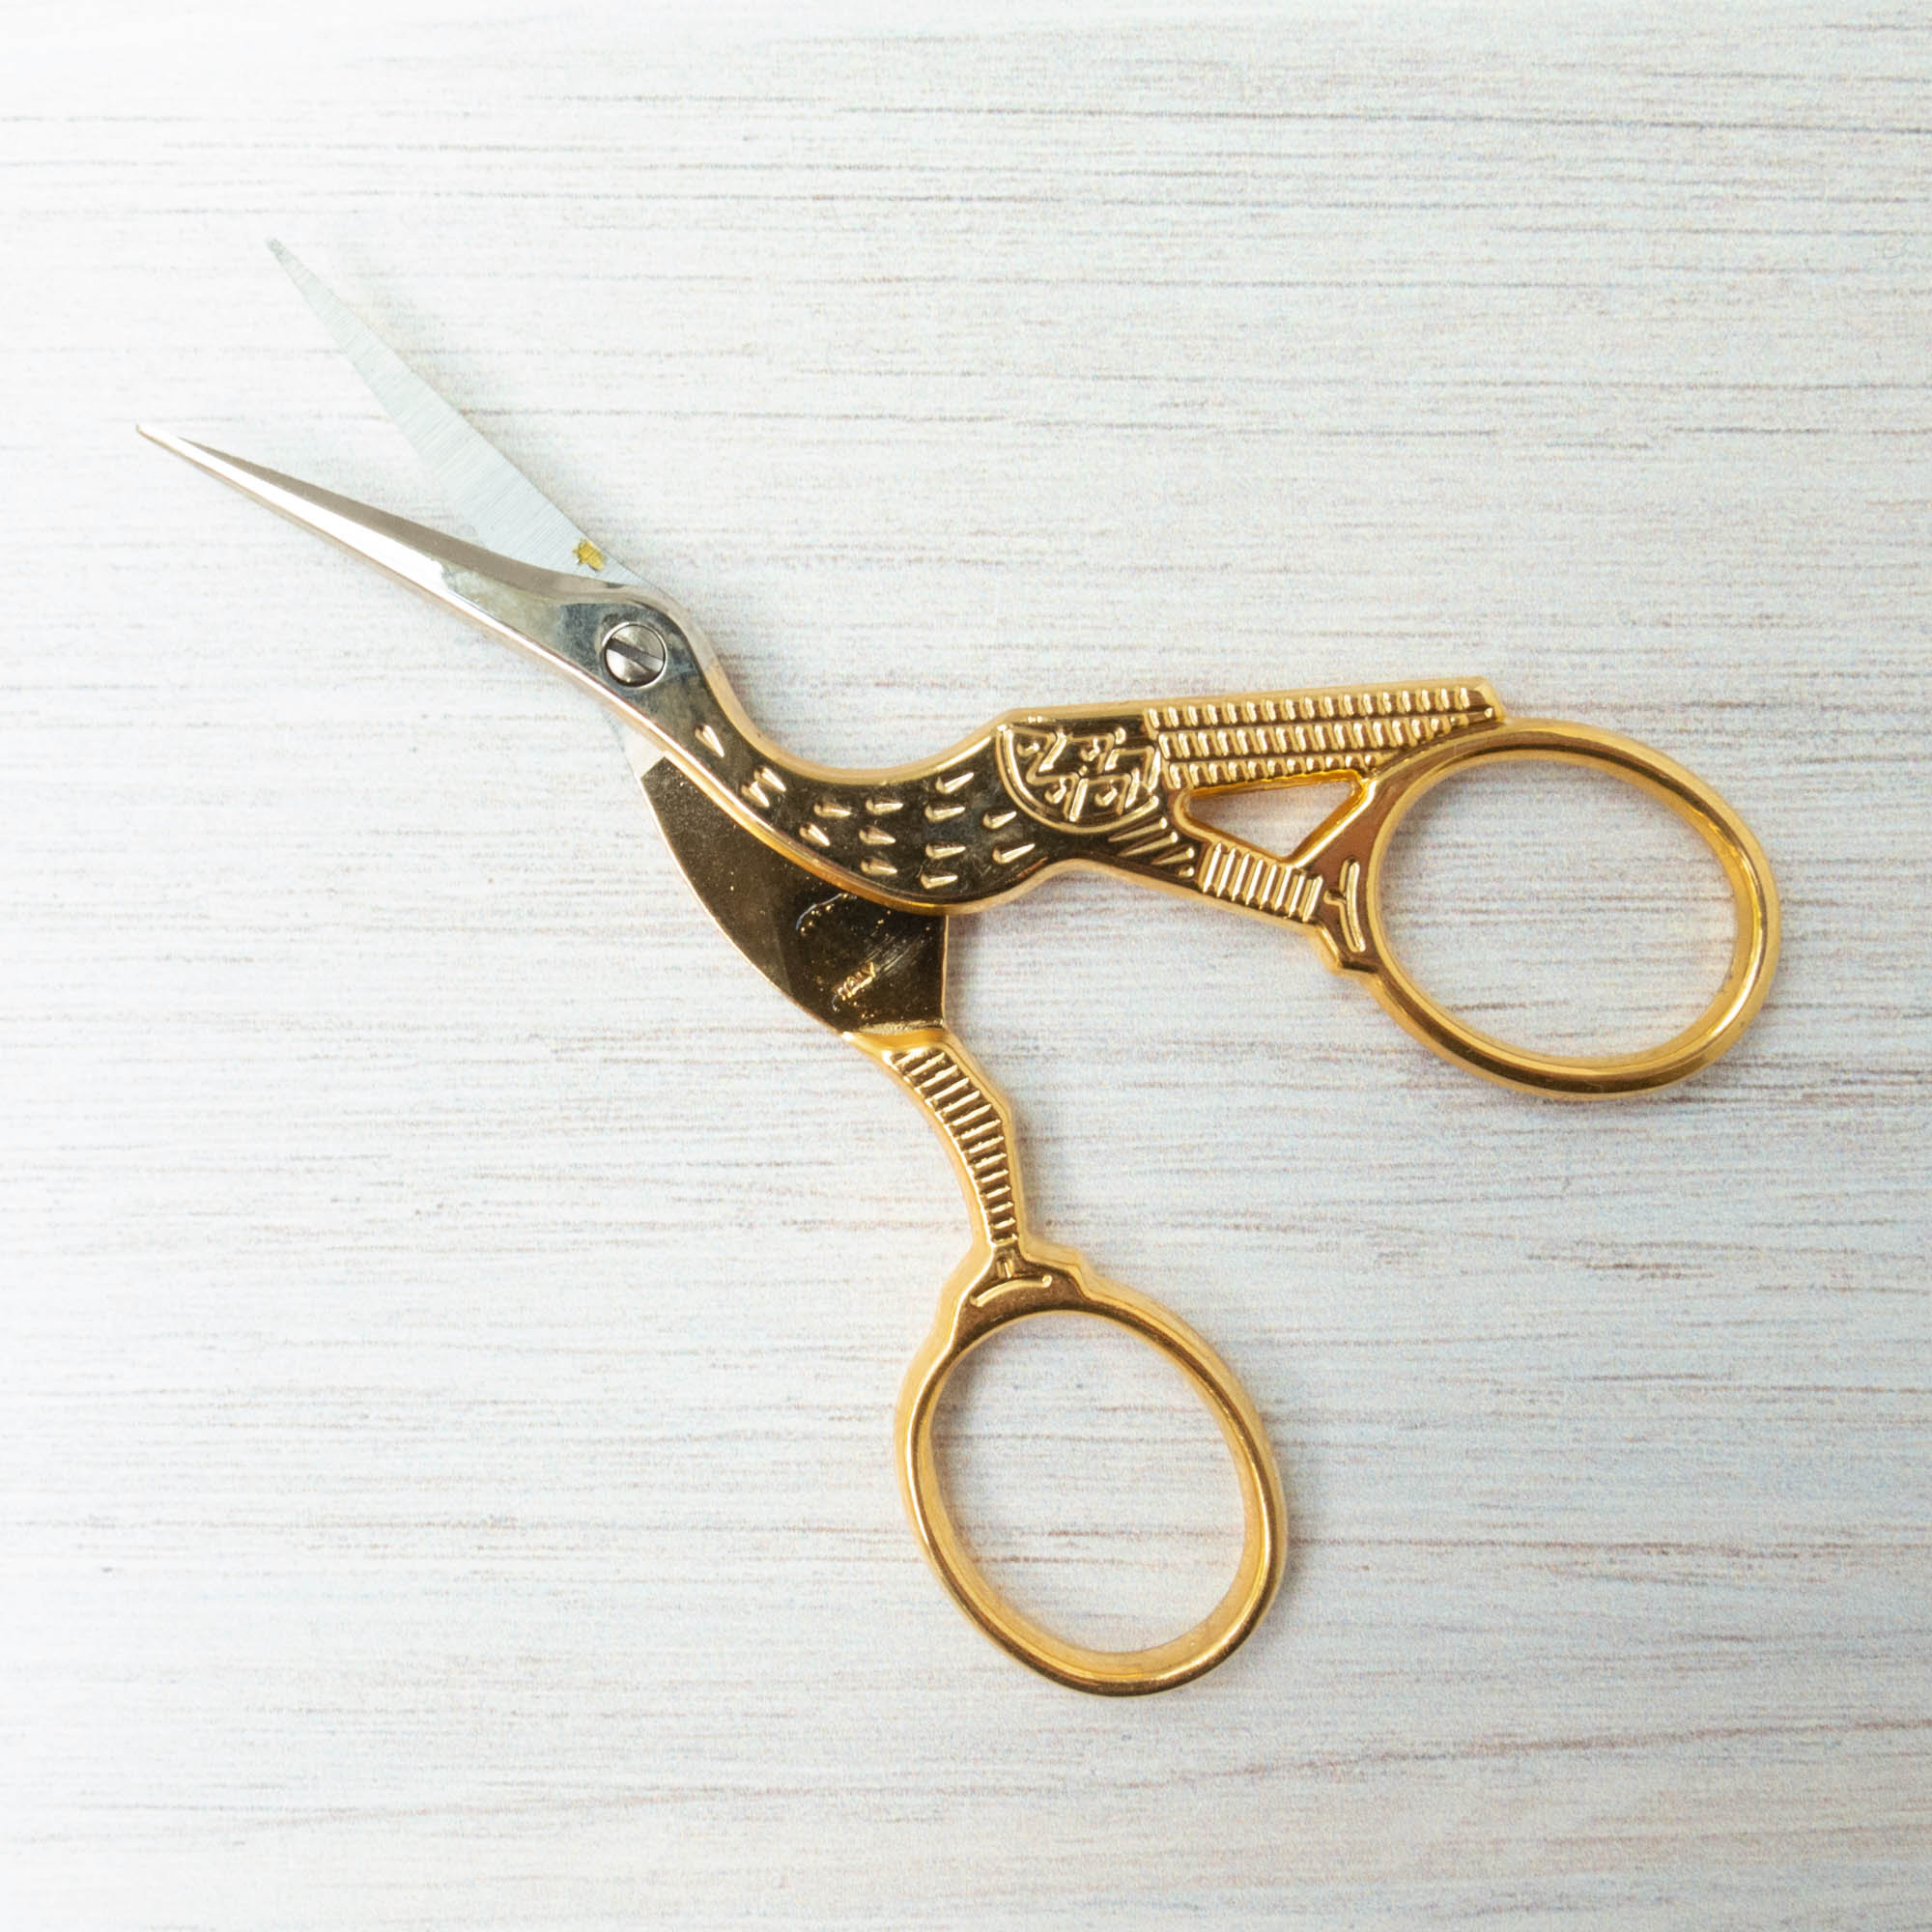 VINTAGE 3 1/2 TINY STORK EMBROIDERY SCISSORS JAPAN MADE W/SHEATH FREE  SHIPPING